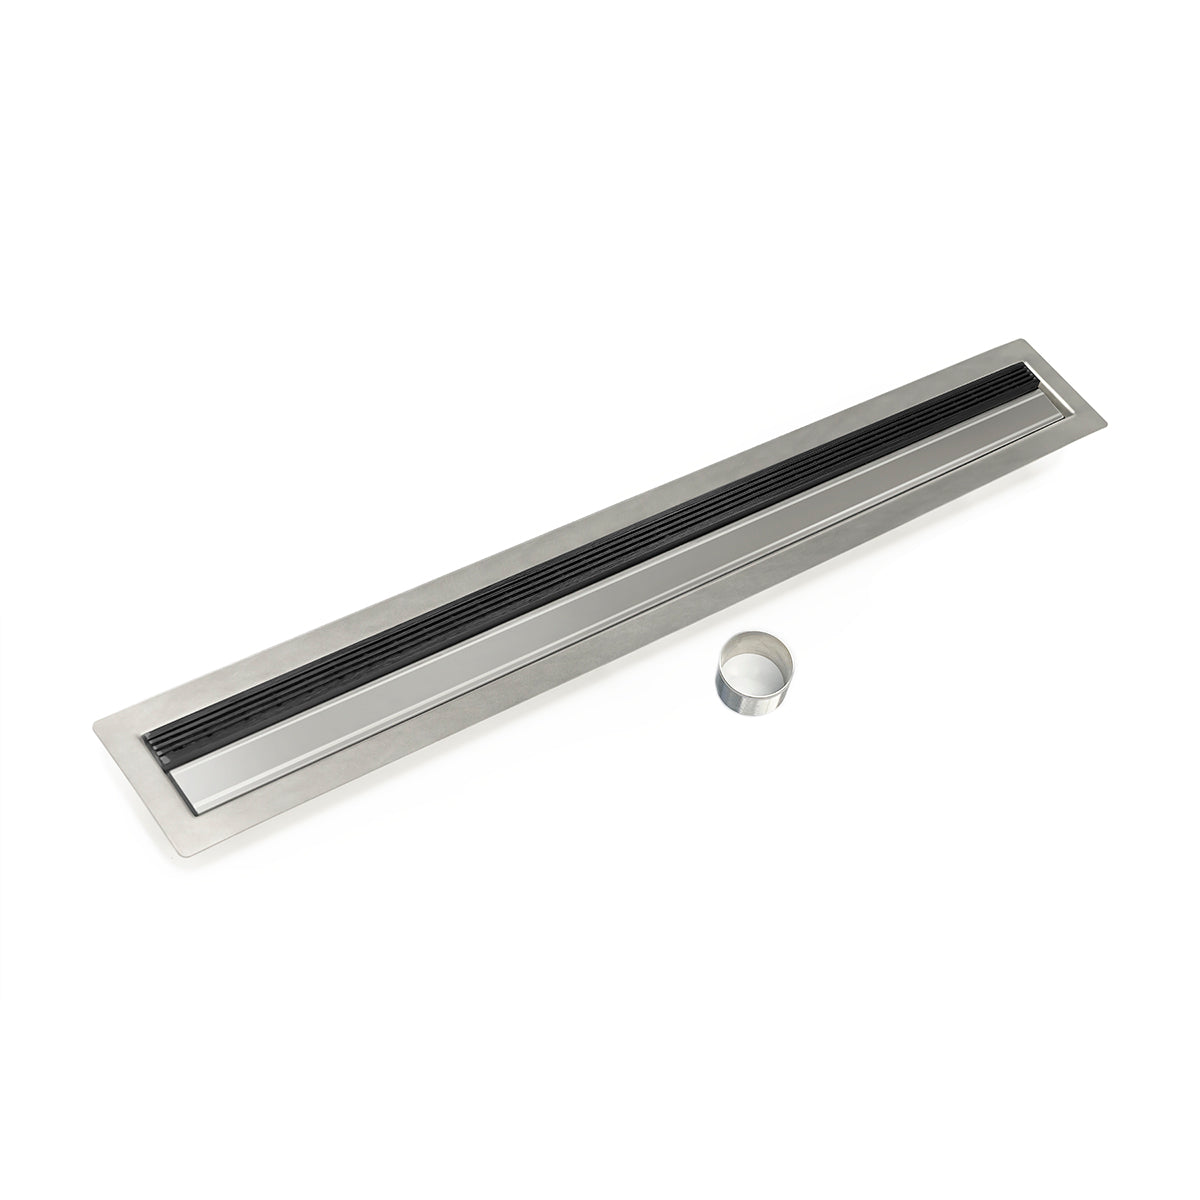 Infinity Drain 42" FCB Series Double Waterproofing Linear Drain Kit with 1" Wedge Wire Grate